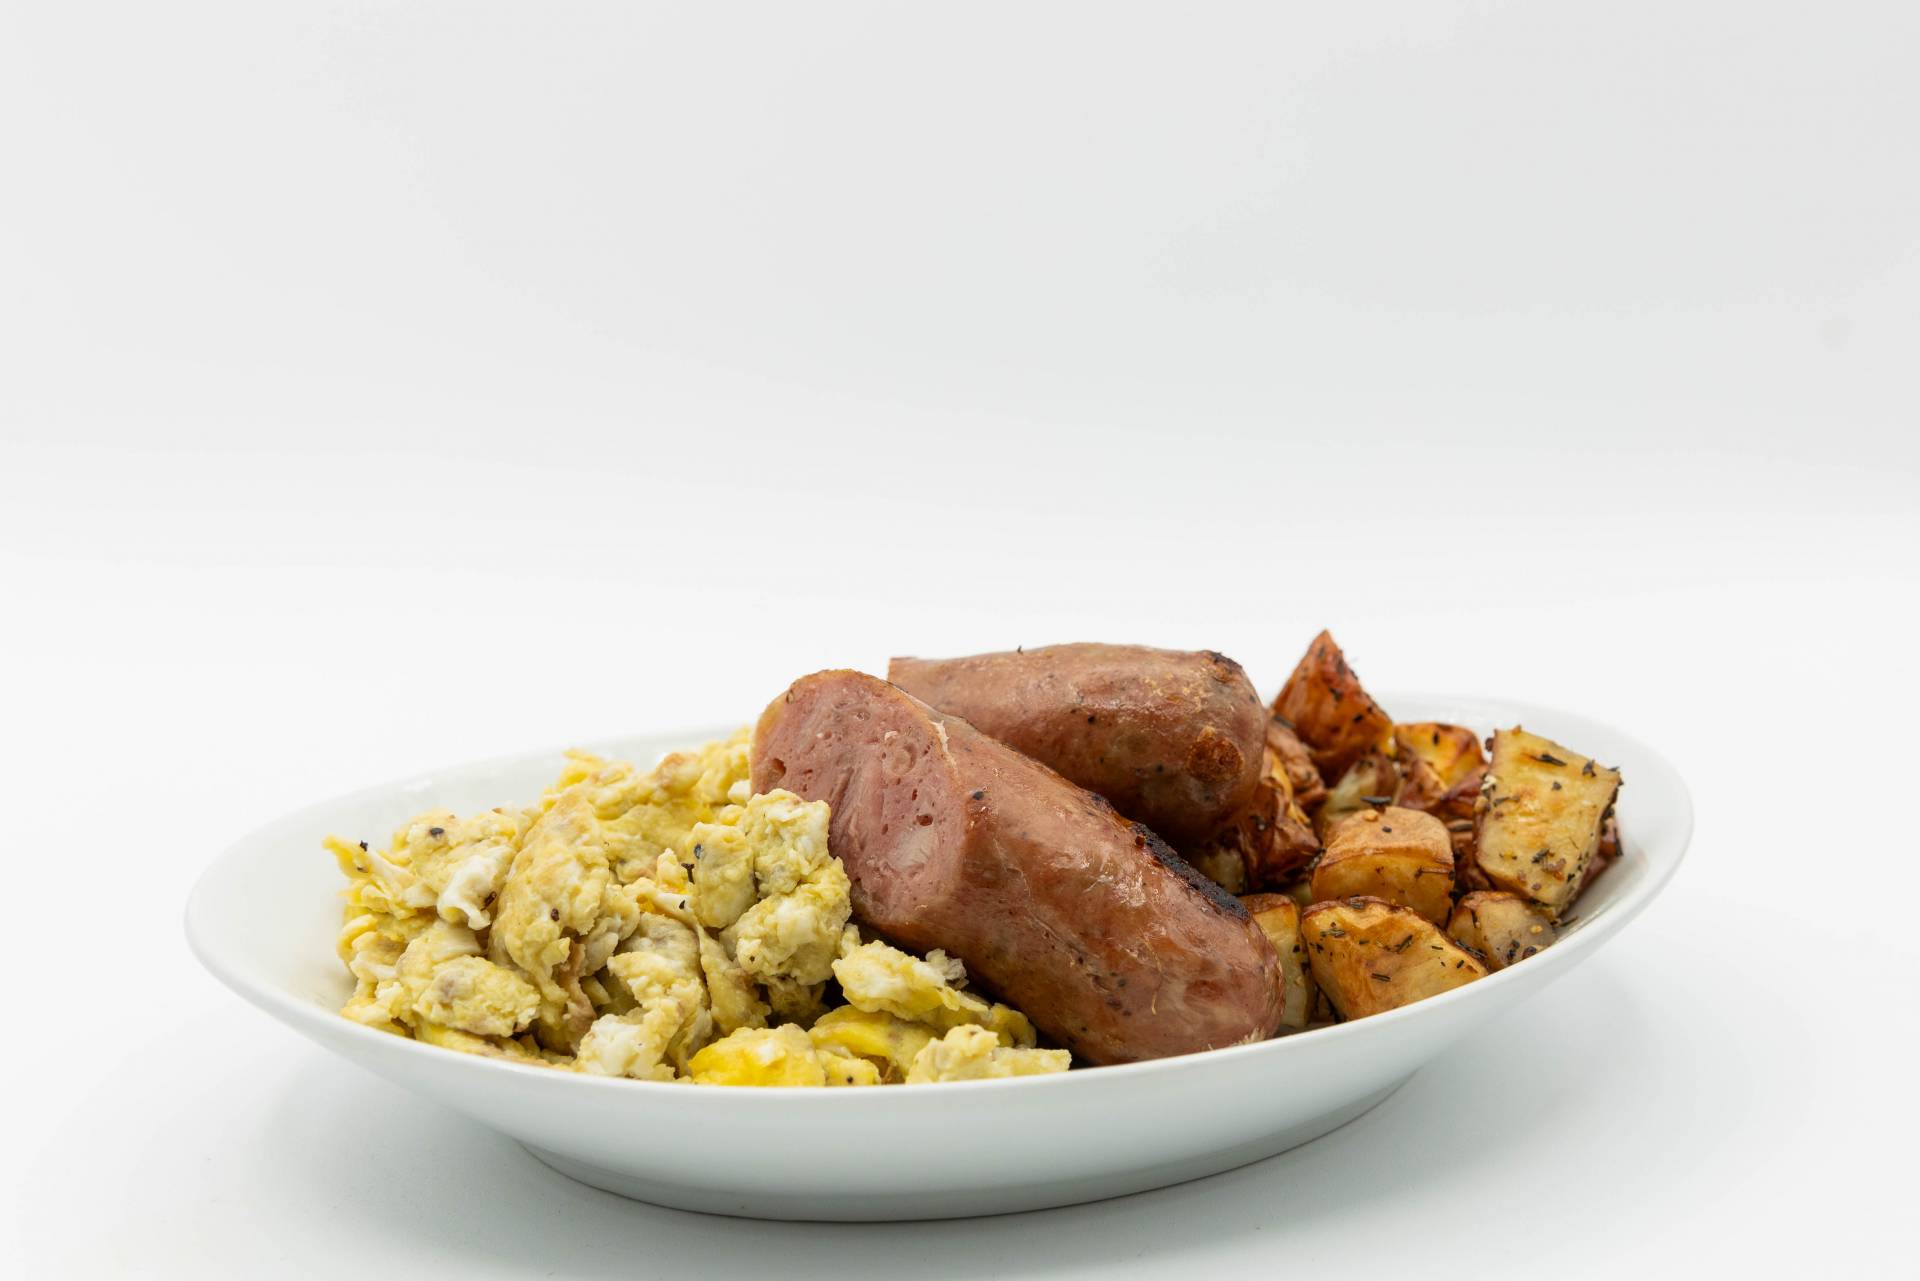 Scrambled Eggs with Chicken Sausage and Potatoes